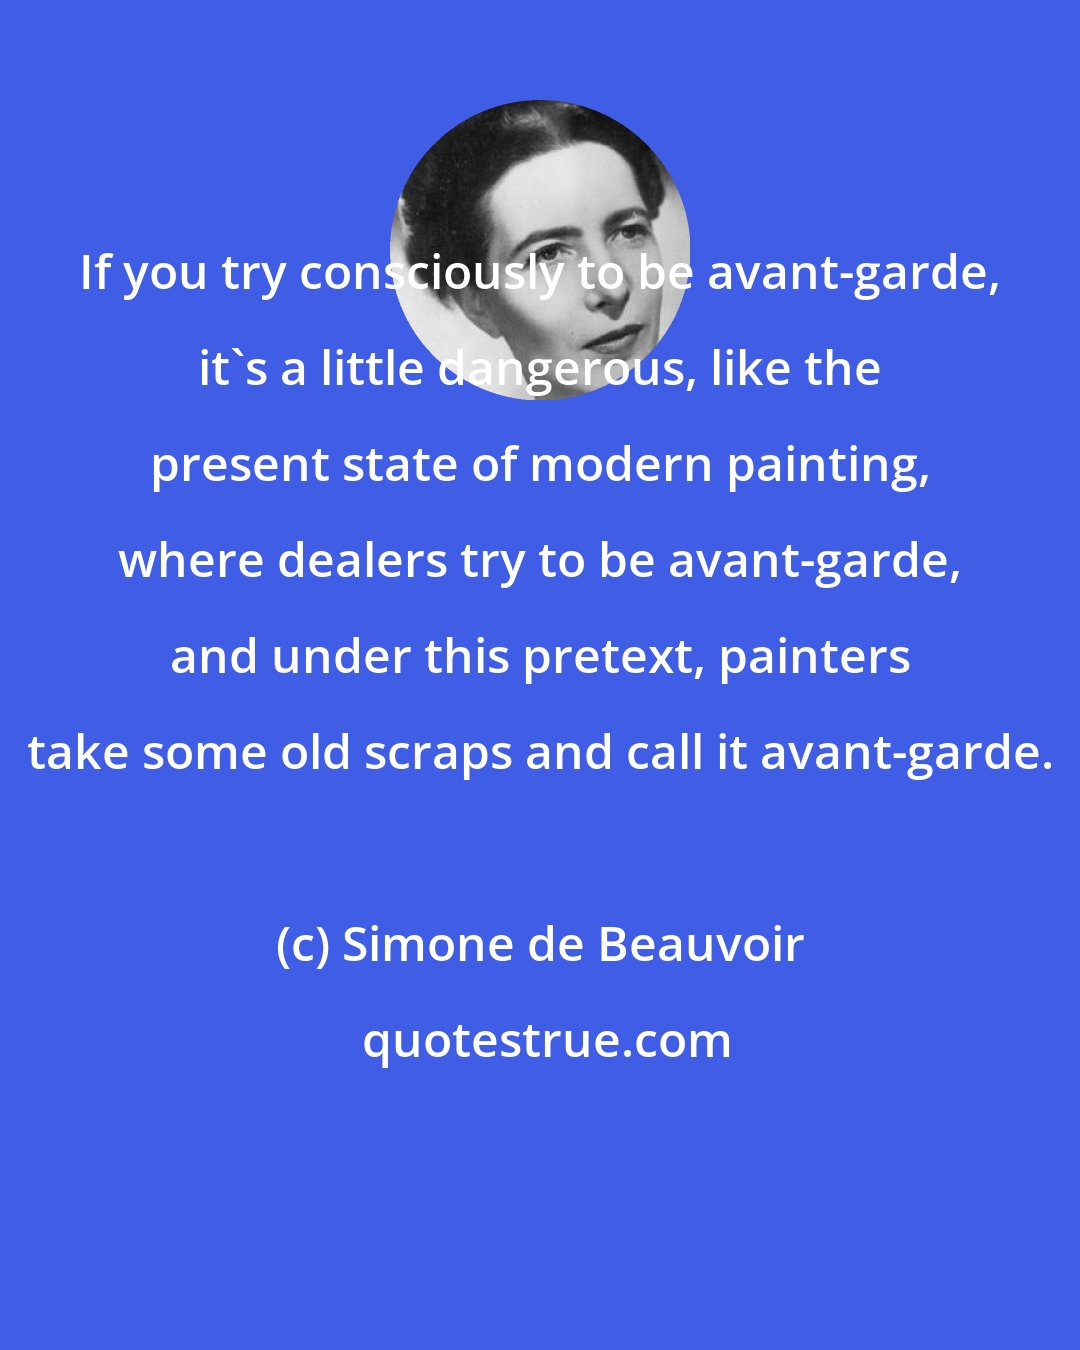 Simone de Beauvoir: If you try consciously to be avant-garde, it's a little dangerous, like the present state of modern painting, where dealers try to be avant-garde, and under this pretext, painters take some old scraps and call it avant-garde.